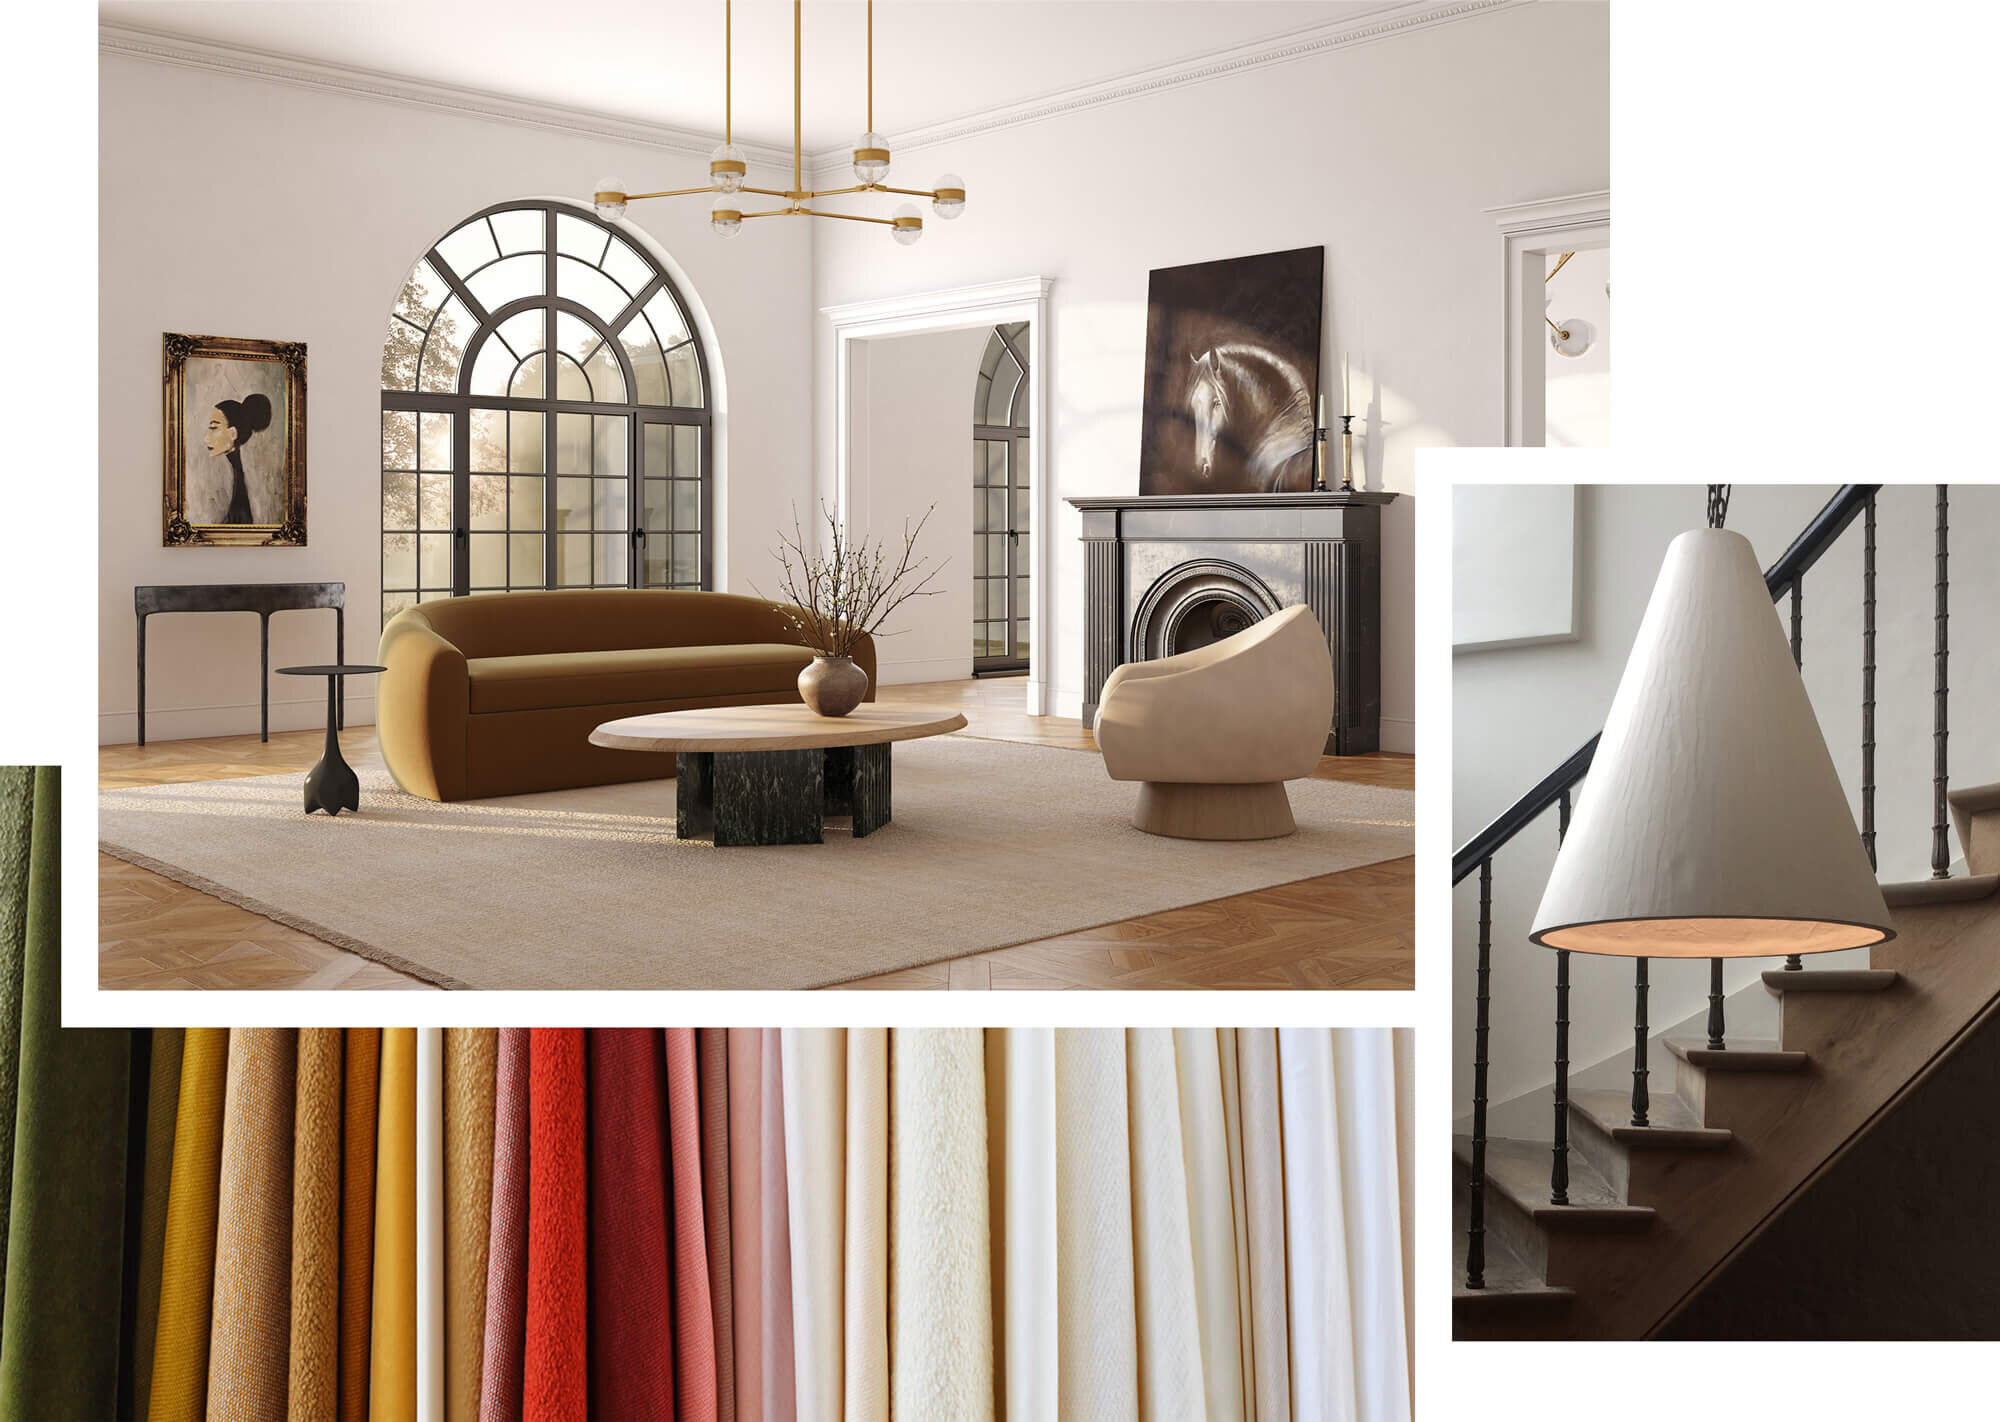 Three images. Top left is a modern living room with curved windows and upholstered furniture. Second one is a closeup of a cone-shaped pendant lamp next to a staircase. Third is a variety of swatches of drape fabrics.